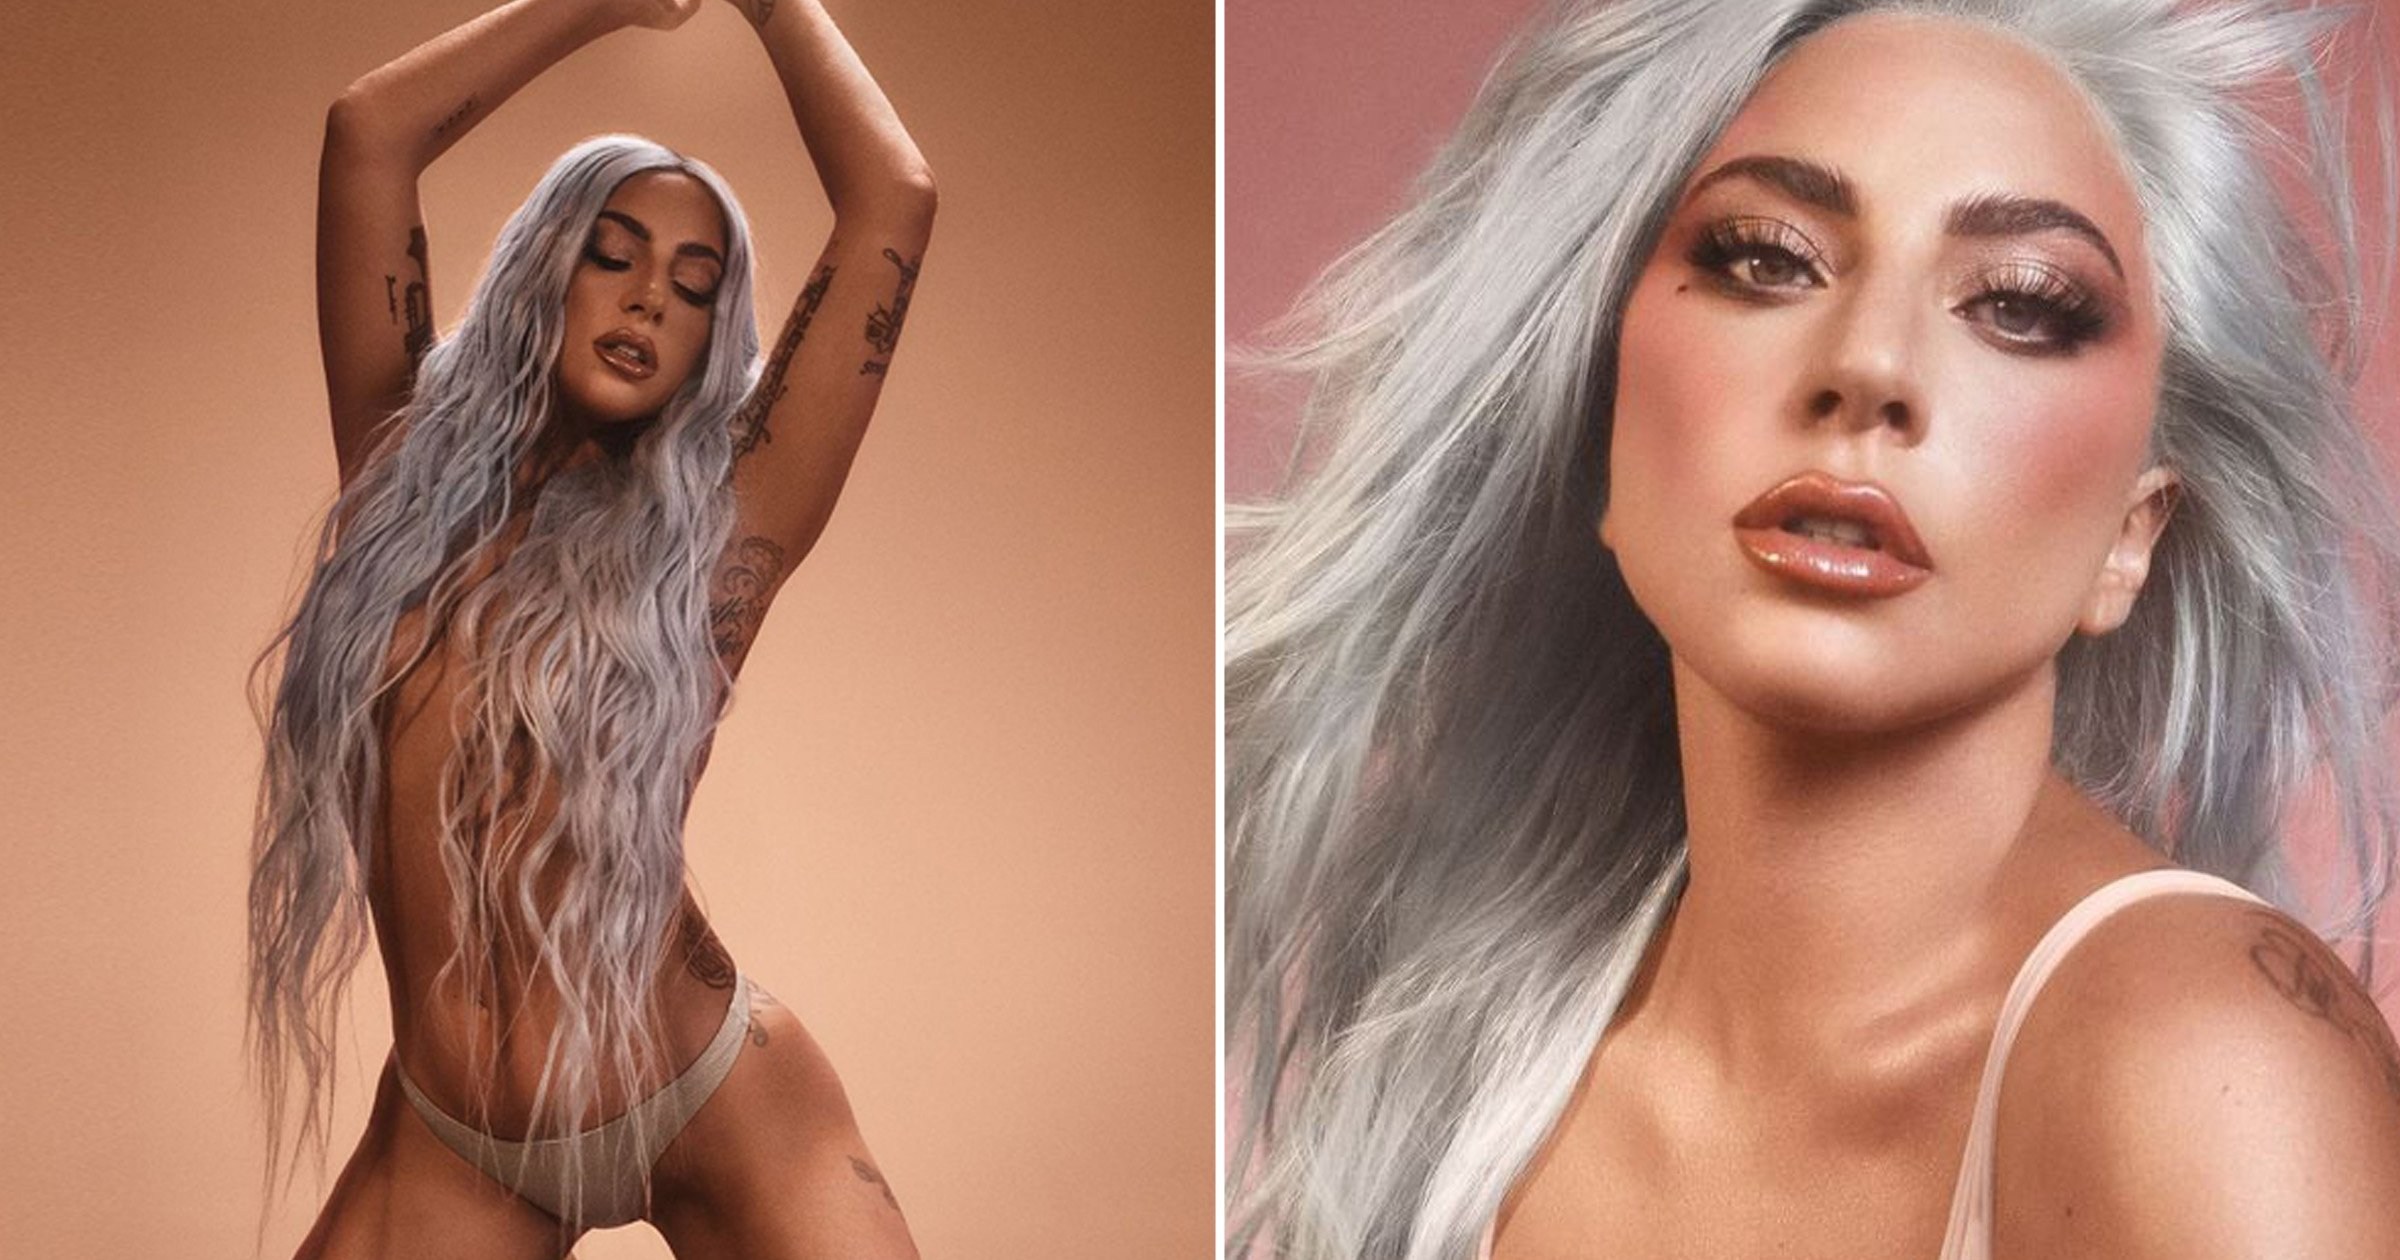 Lady Gaga Slays In Topless Photoshoot For Haus Laboratories Beauty Line